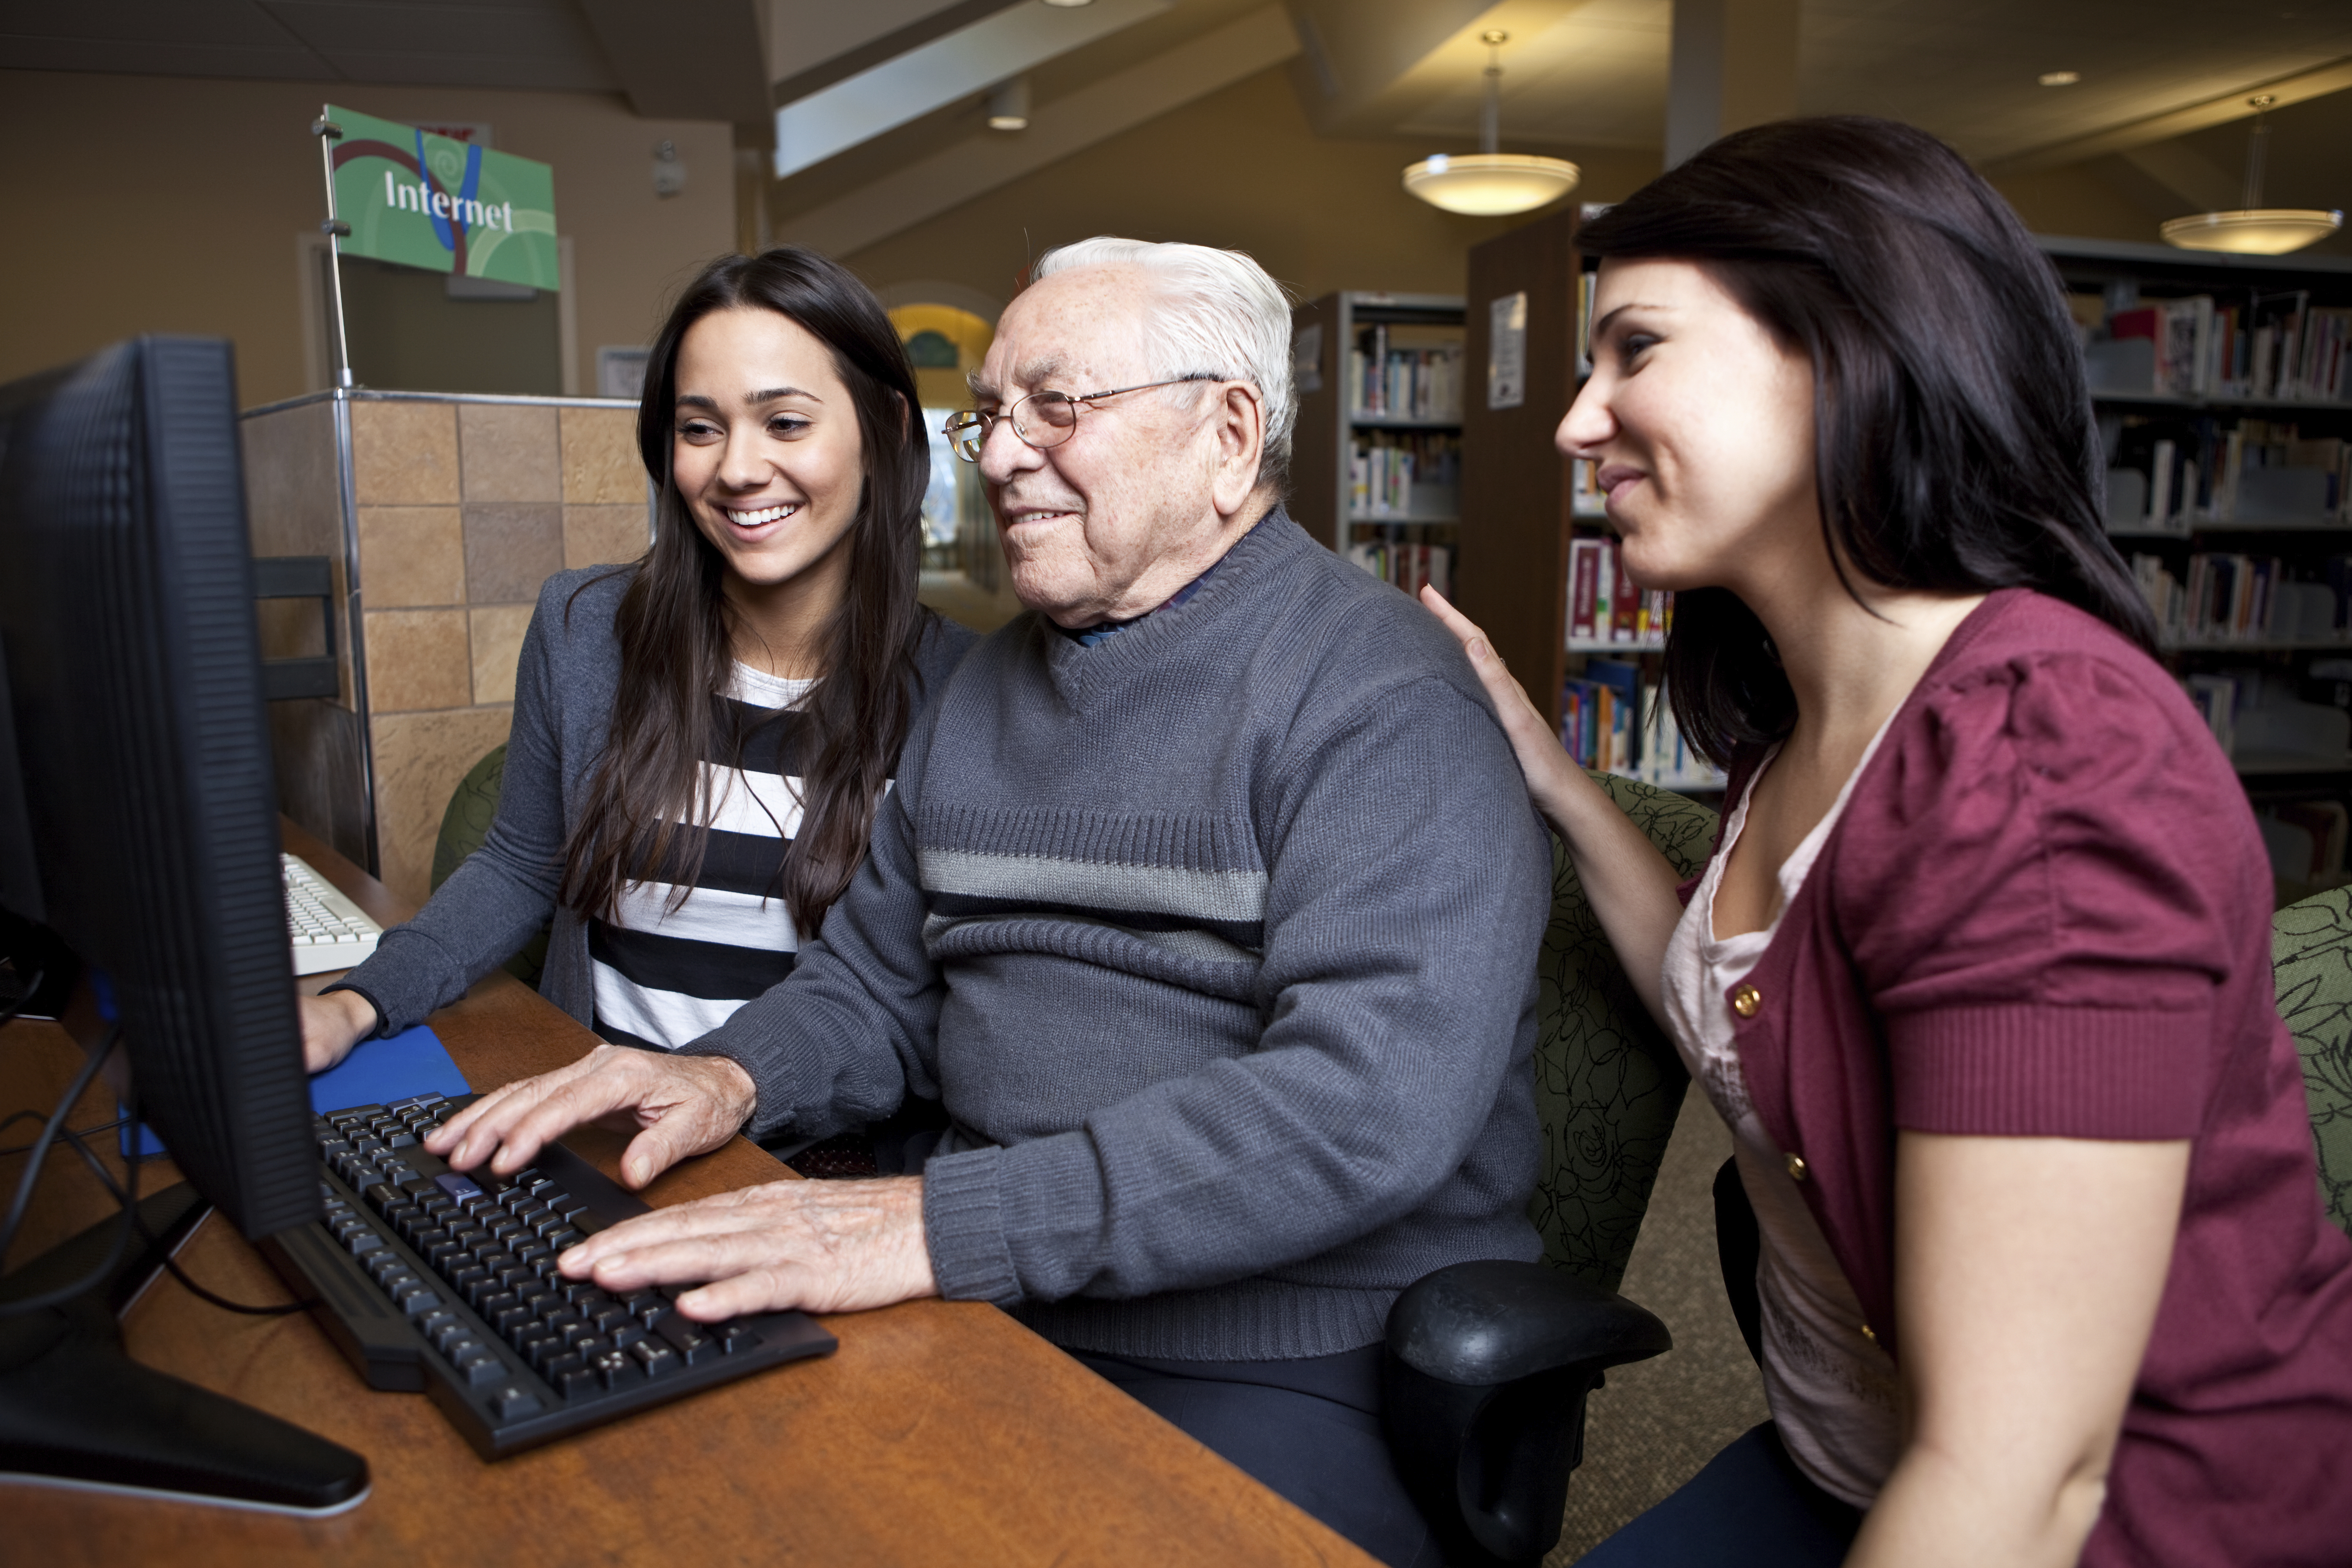 Two social work students help an elderly man use a computer.